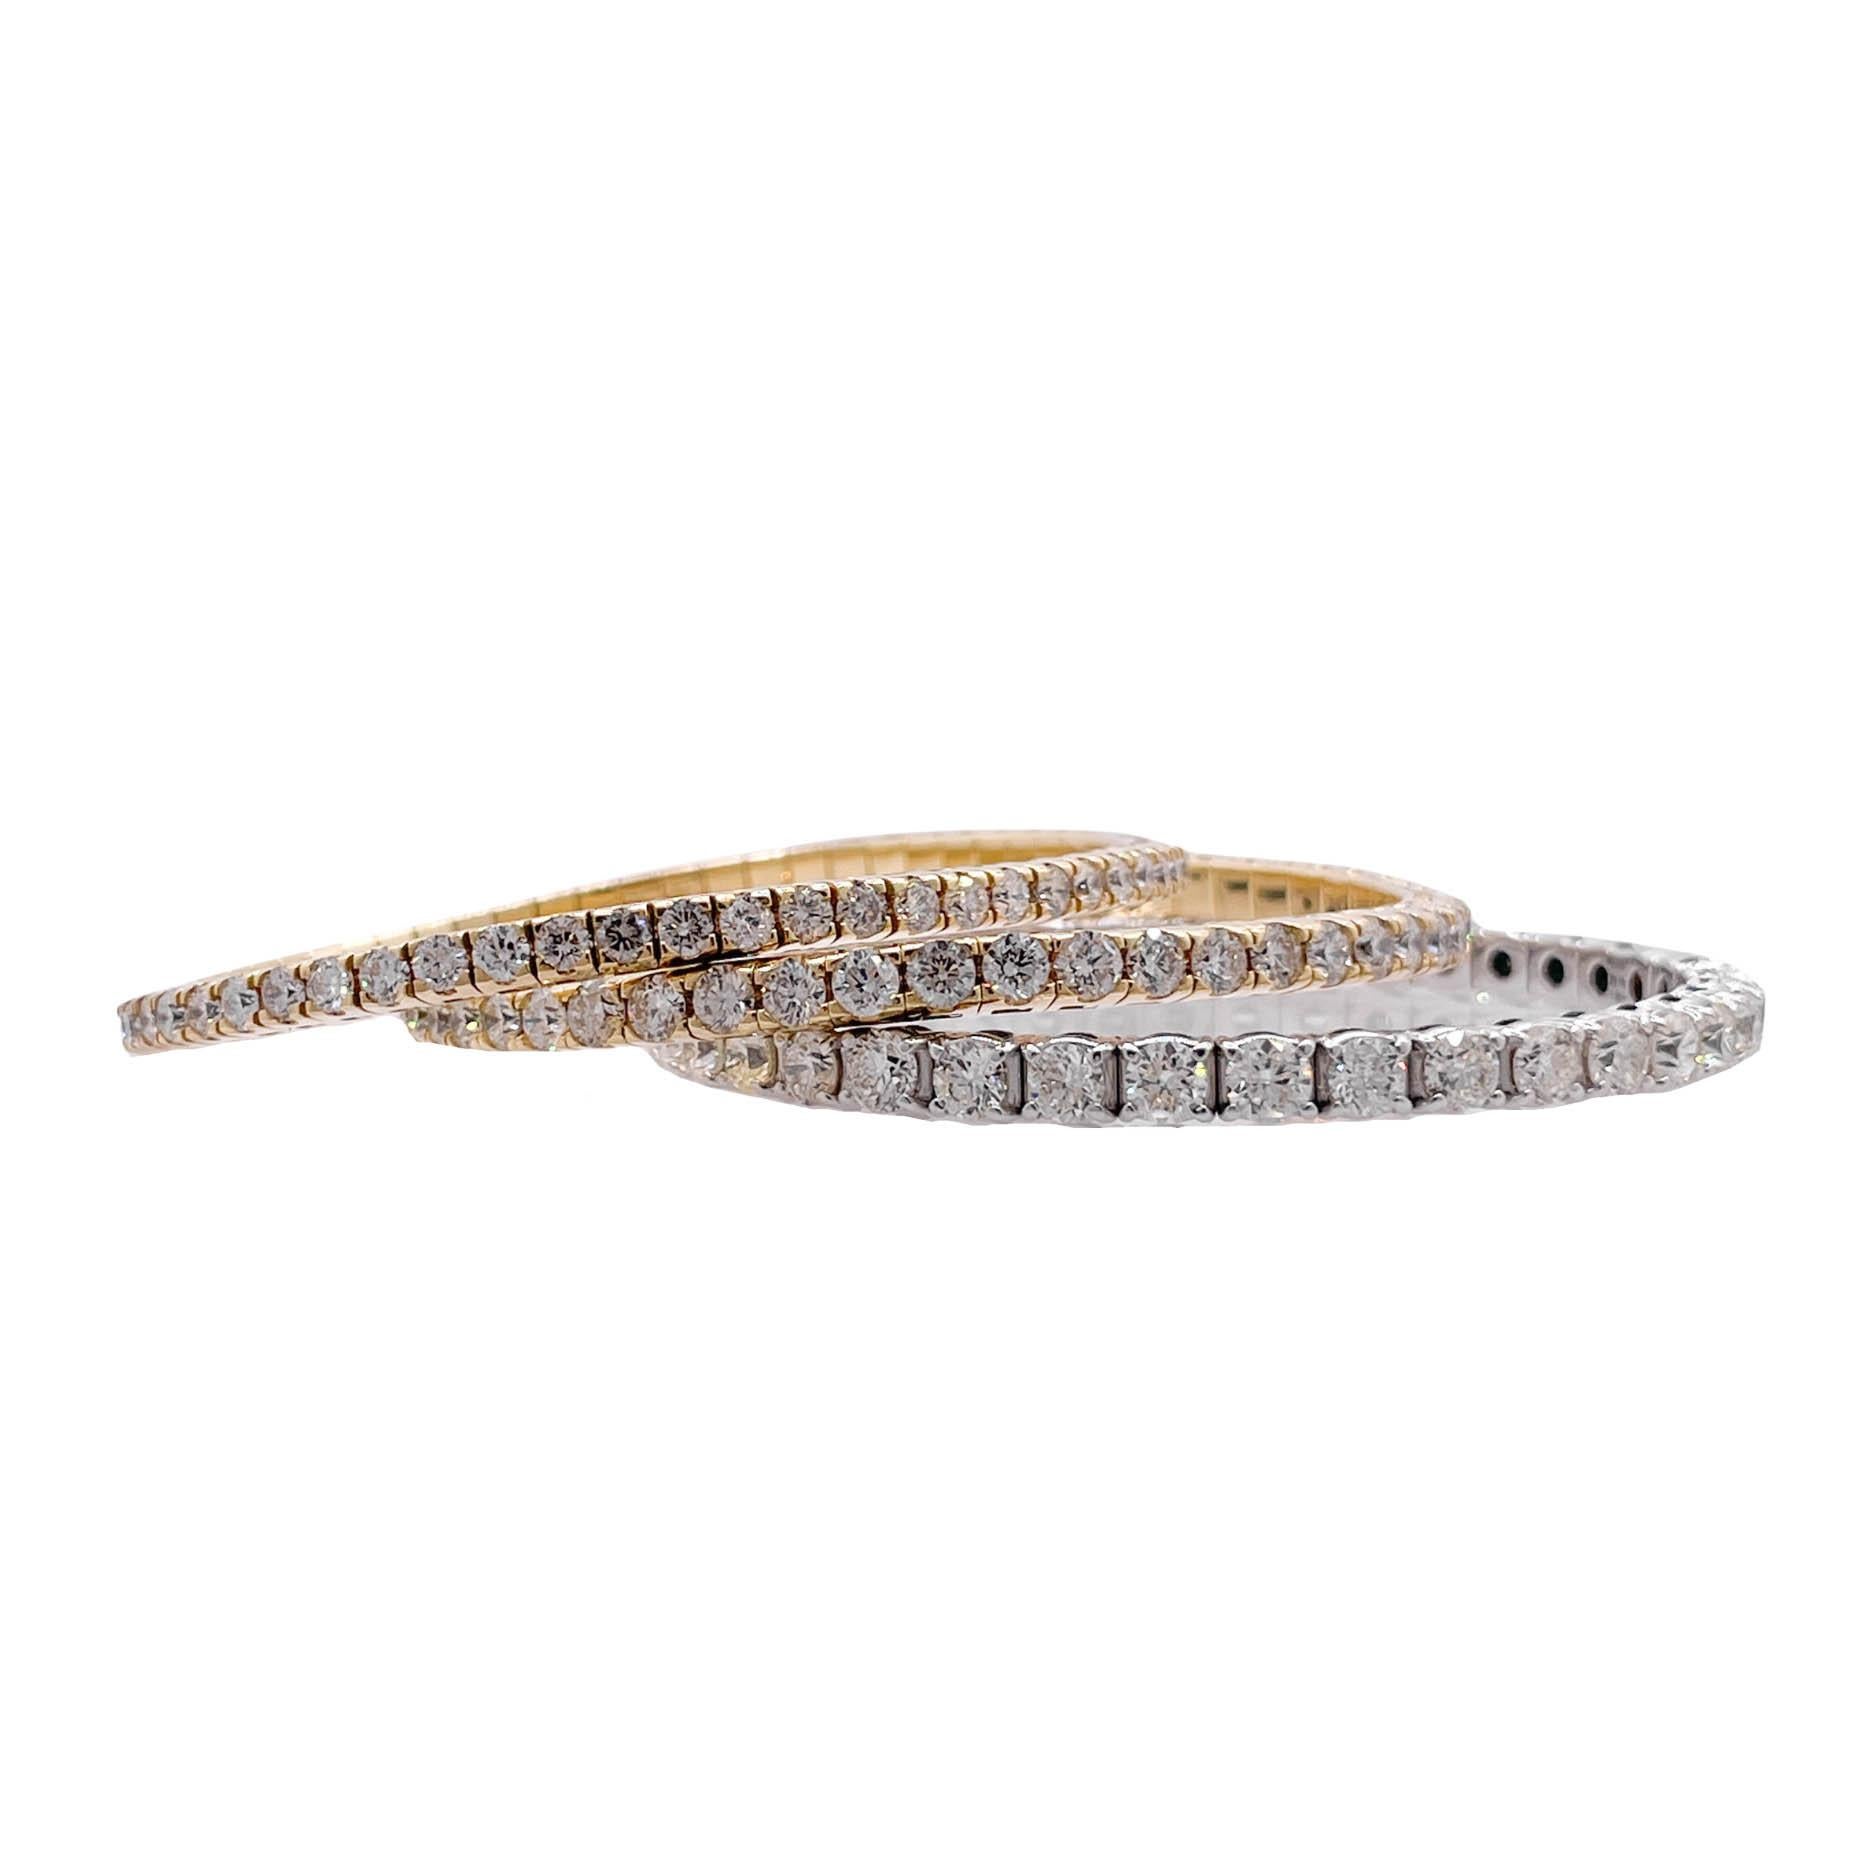 Jay Feder 18k White Gold Diamond Stretchy Tennis Bangle Bracelet

Set with 39 round diamonds; total carat weight is 9.75ctw.

The bracelet is 2.5 inches in diameter and 4.23mm wide. Total weight is 20.6 grams.

Please view our photos and videos for